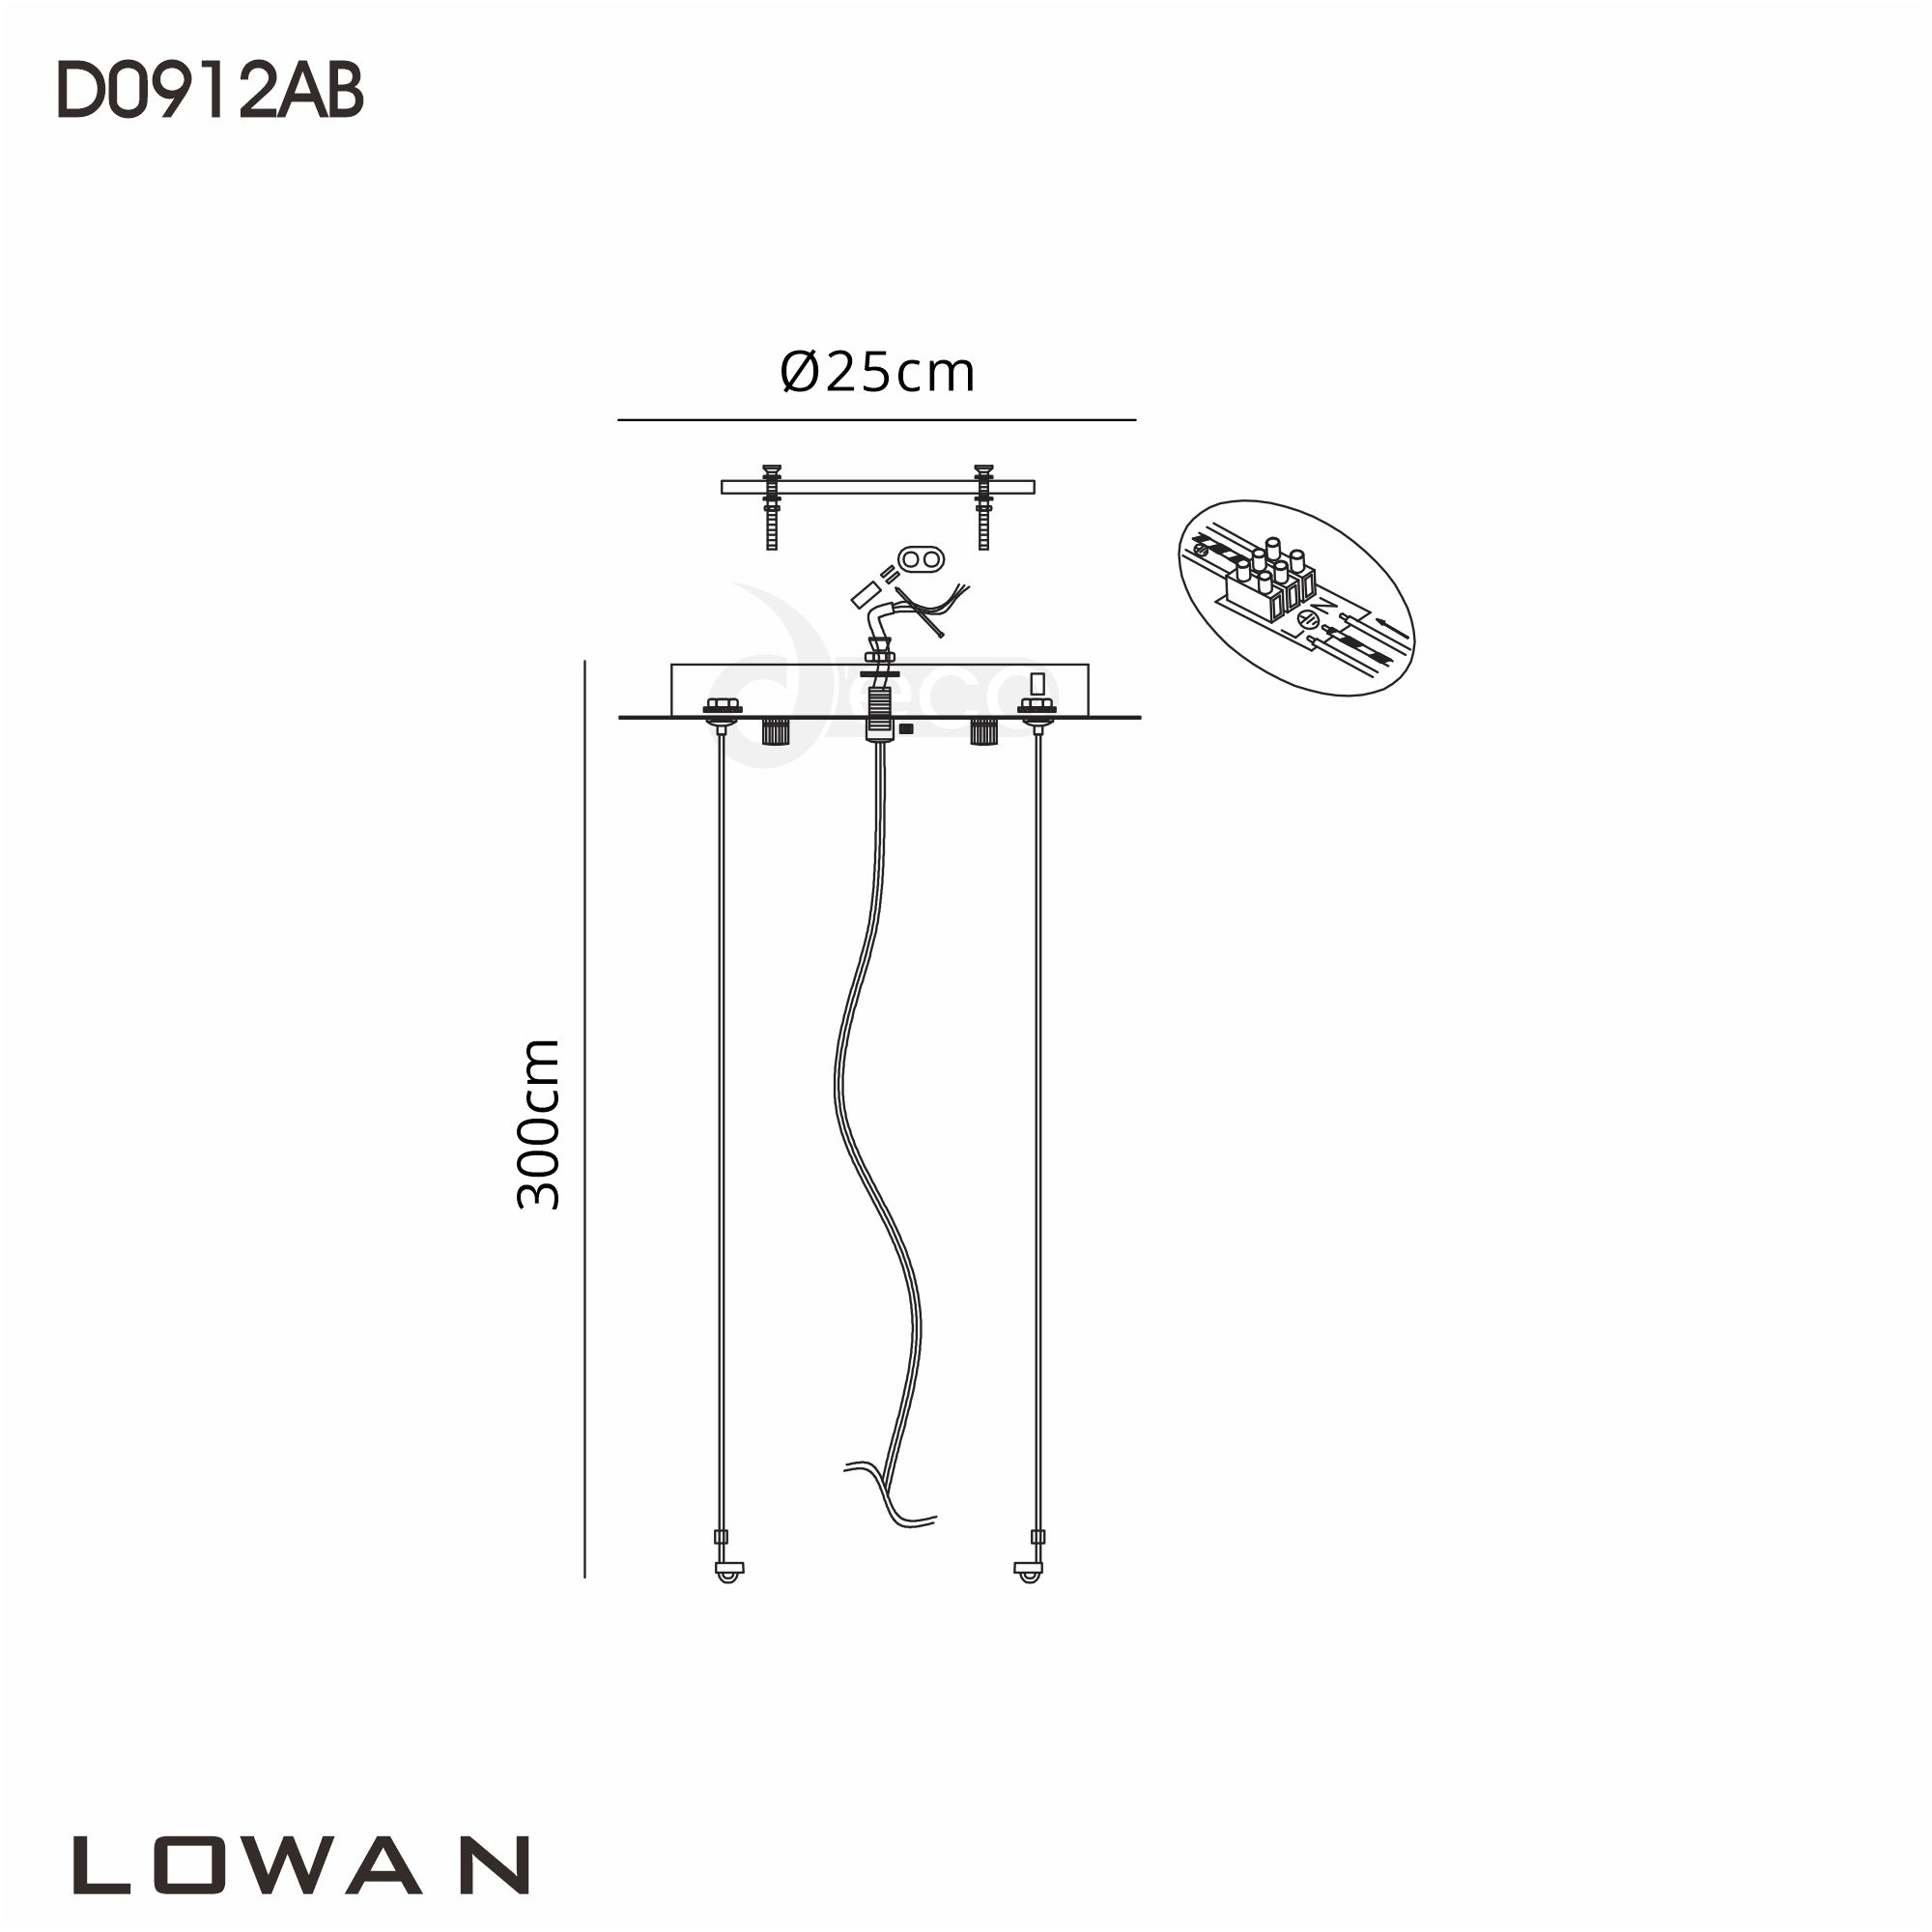 D0939AB  Lowan 890mm, 3m Suspension Plate c/w Power Cable To Lower Flush Fittings, Antique Brass Max Load 40kg (ONLY TESTED FOR OUR RANGE OF PRODUCTS)